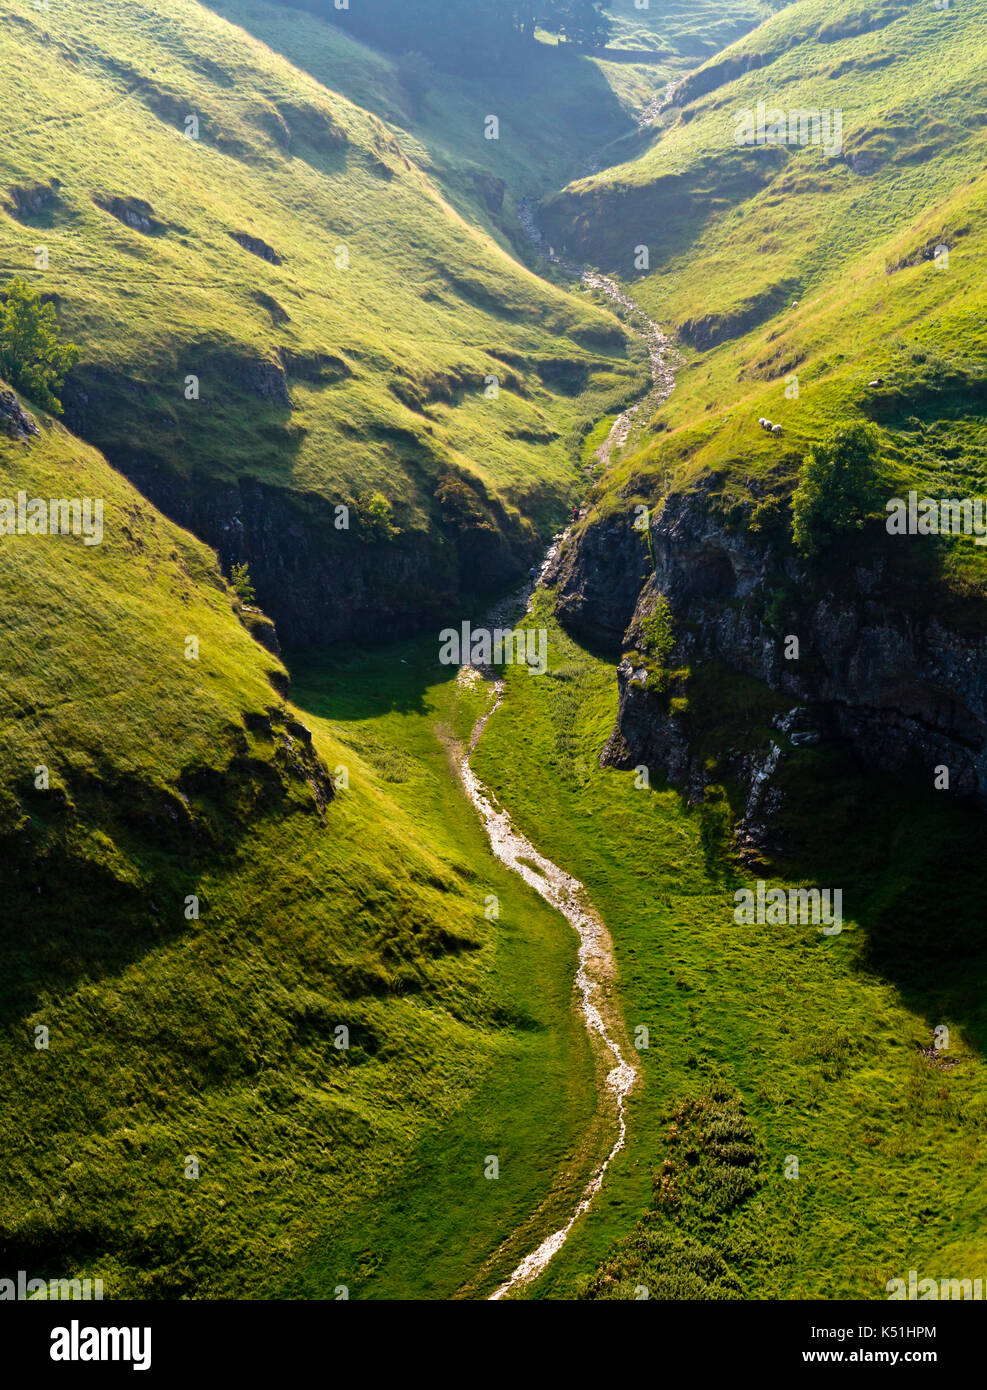 View looking down on Cave Dale a dry limestone valley near Castleton in the Derbyshire Peak District England UK Stock Photo